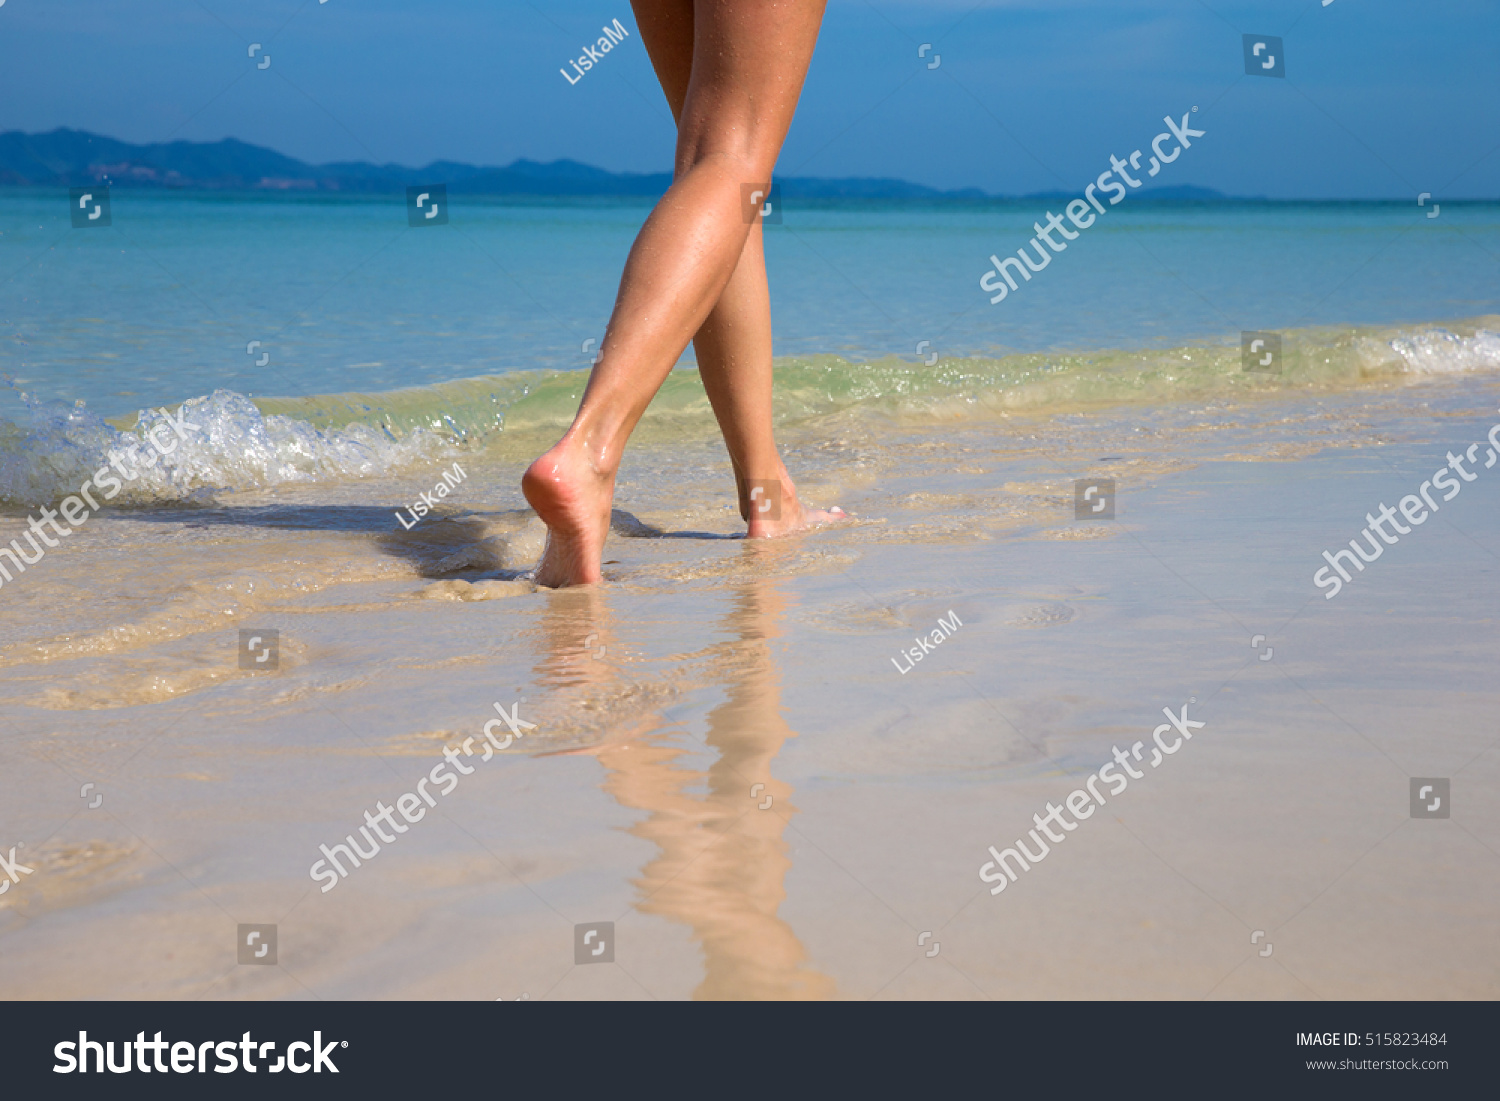 Woman walking on sand beach leaving footprints in the sand #515823484